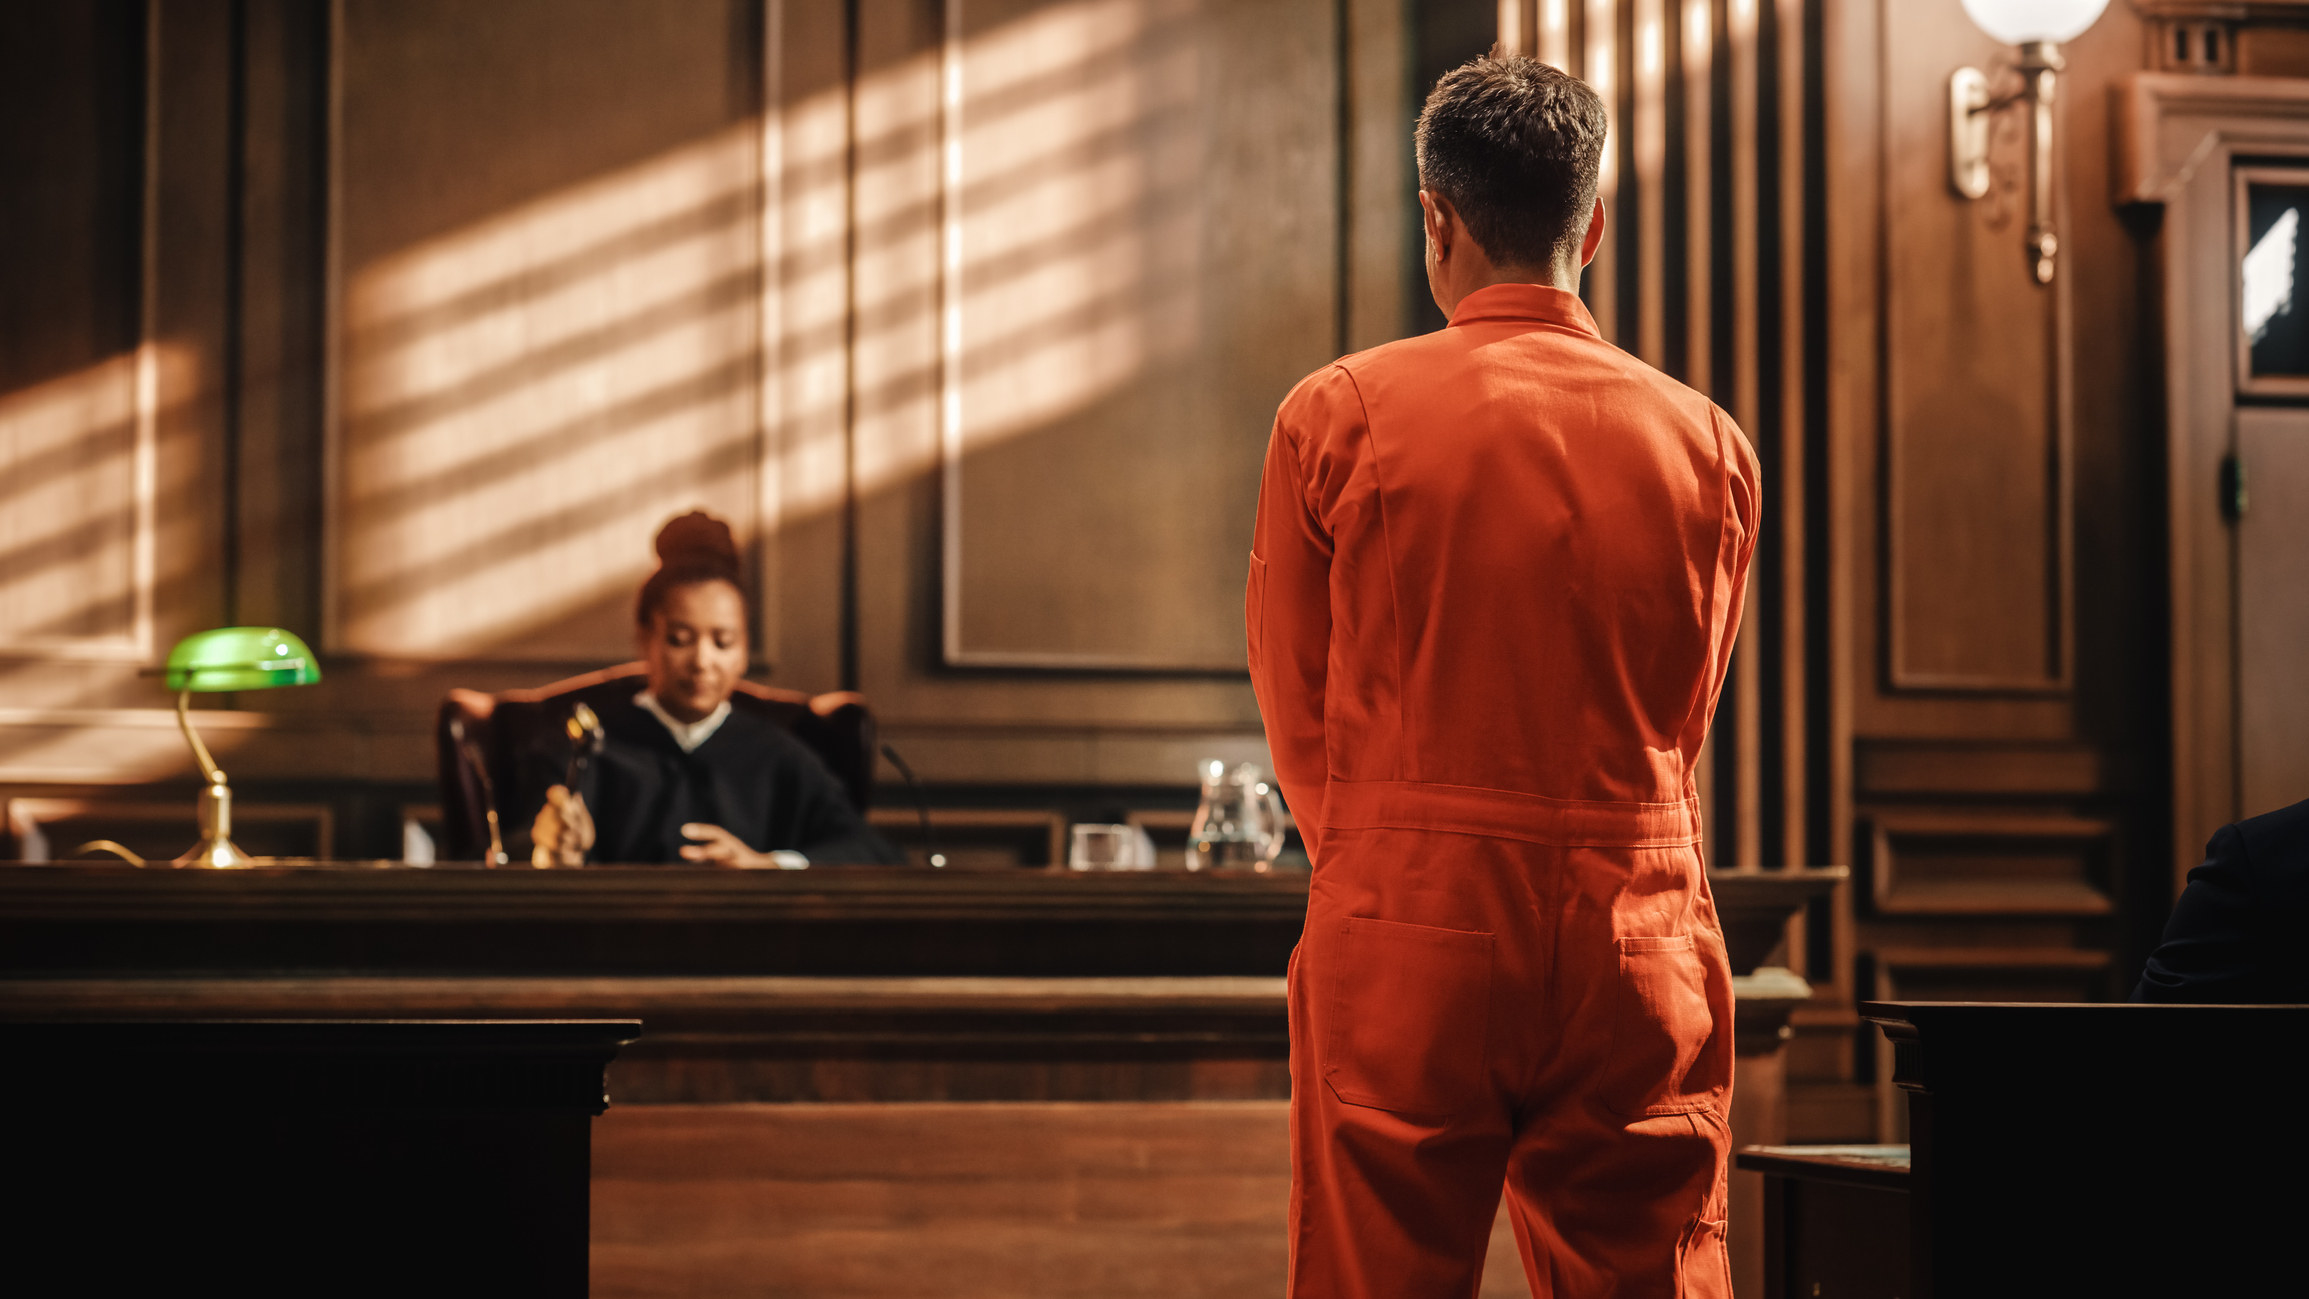 An inmate speaking to a judge